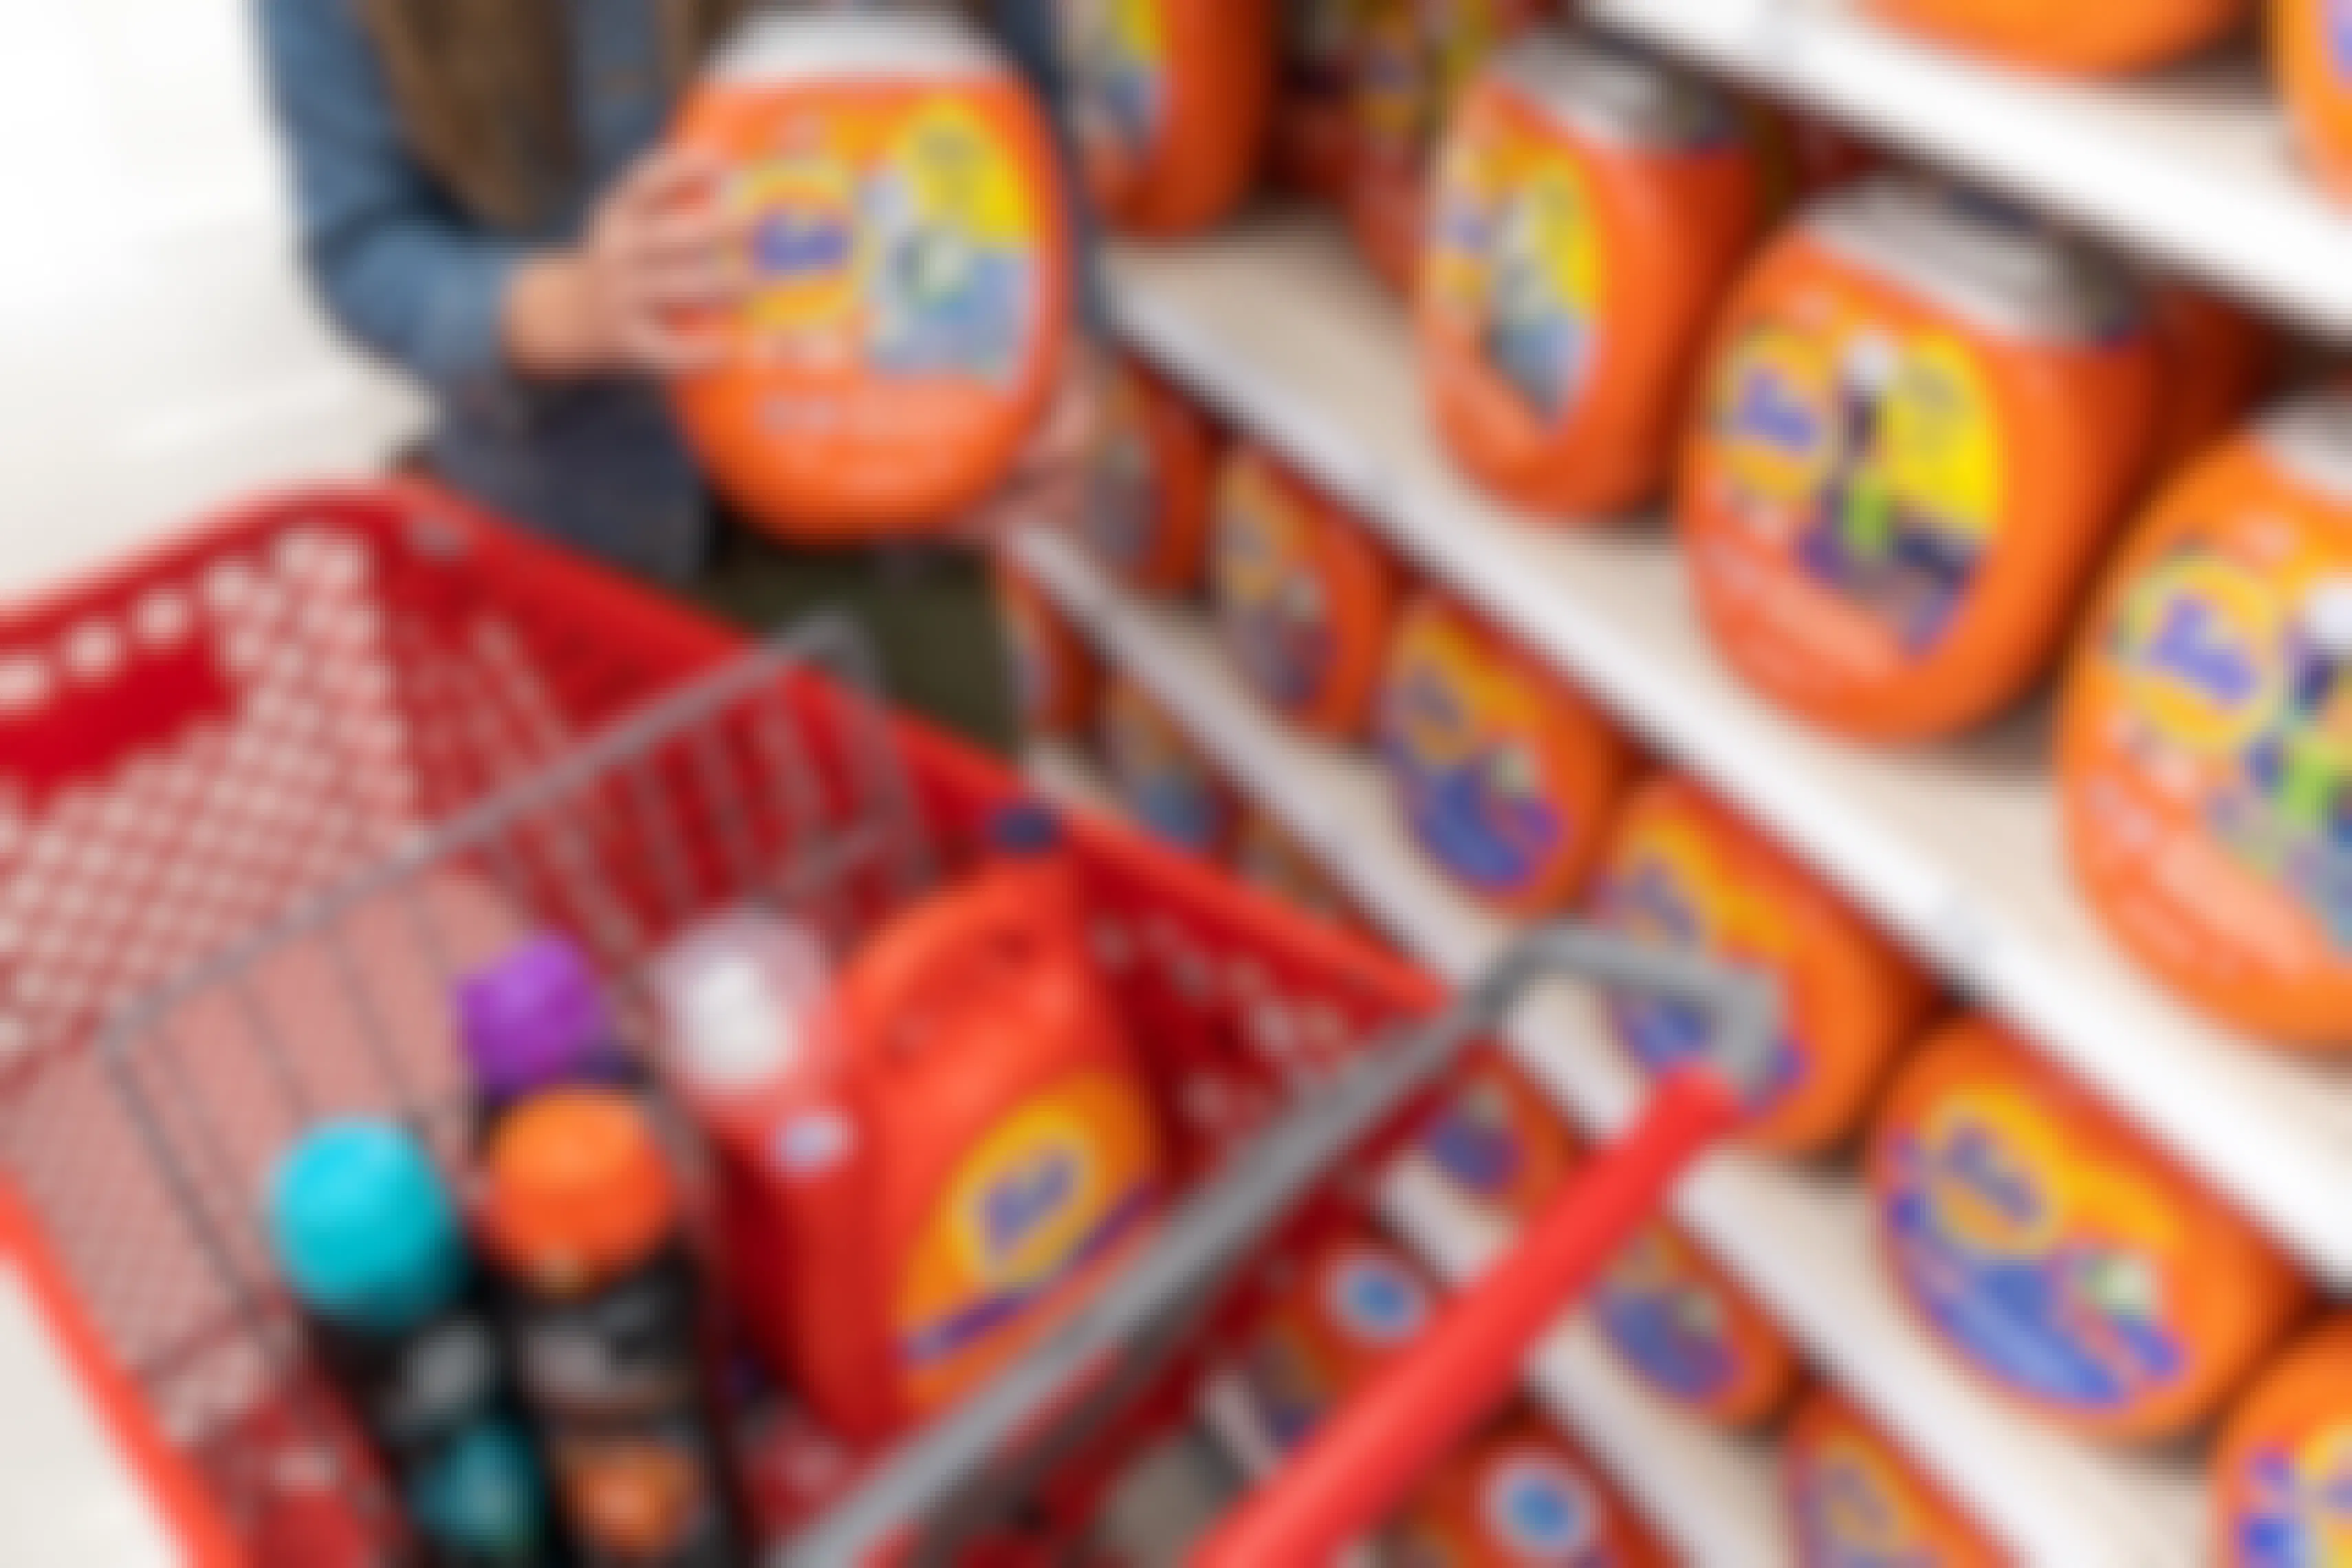 A woman standing behind a red Target shopping cart, holding a container of tide pods, with other laundry products in the shopping cart.